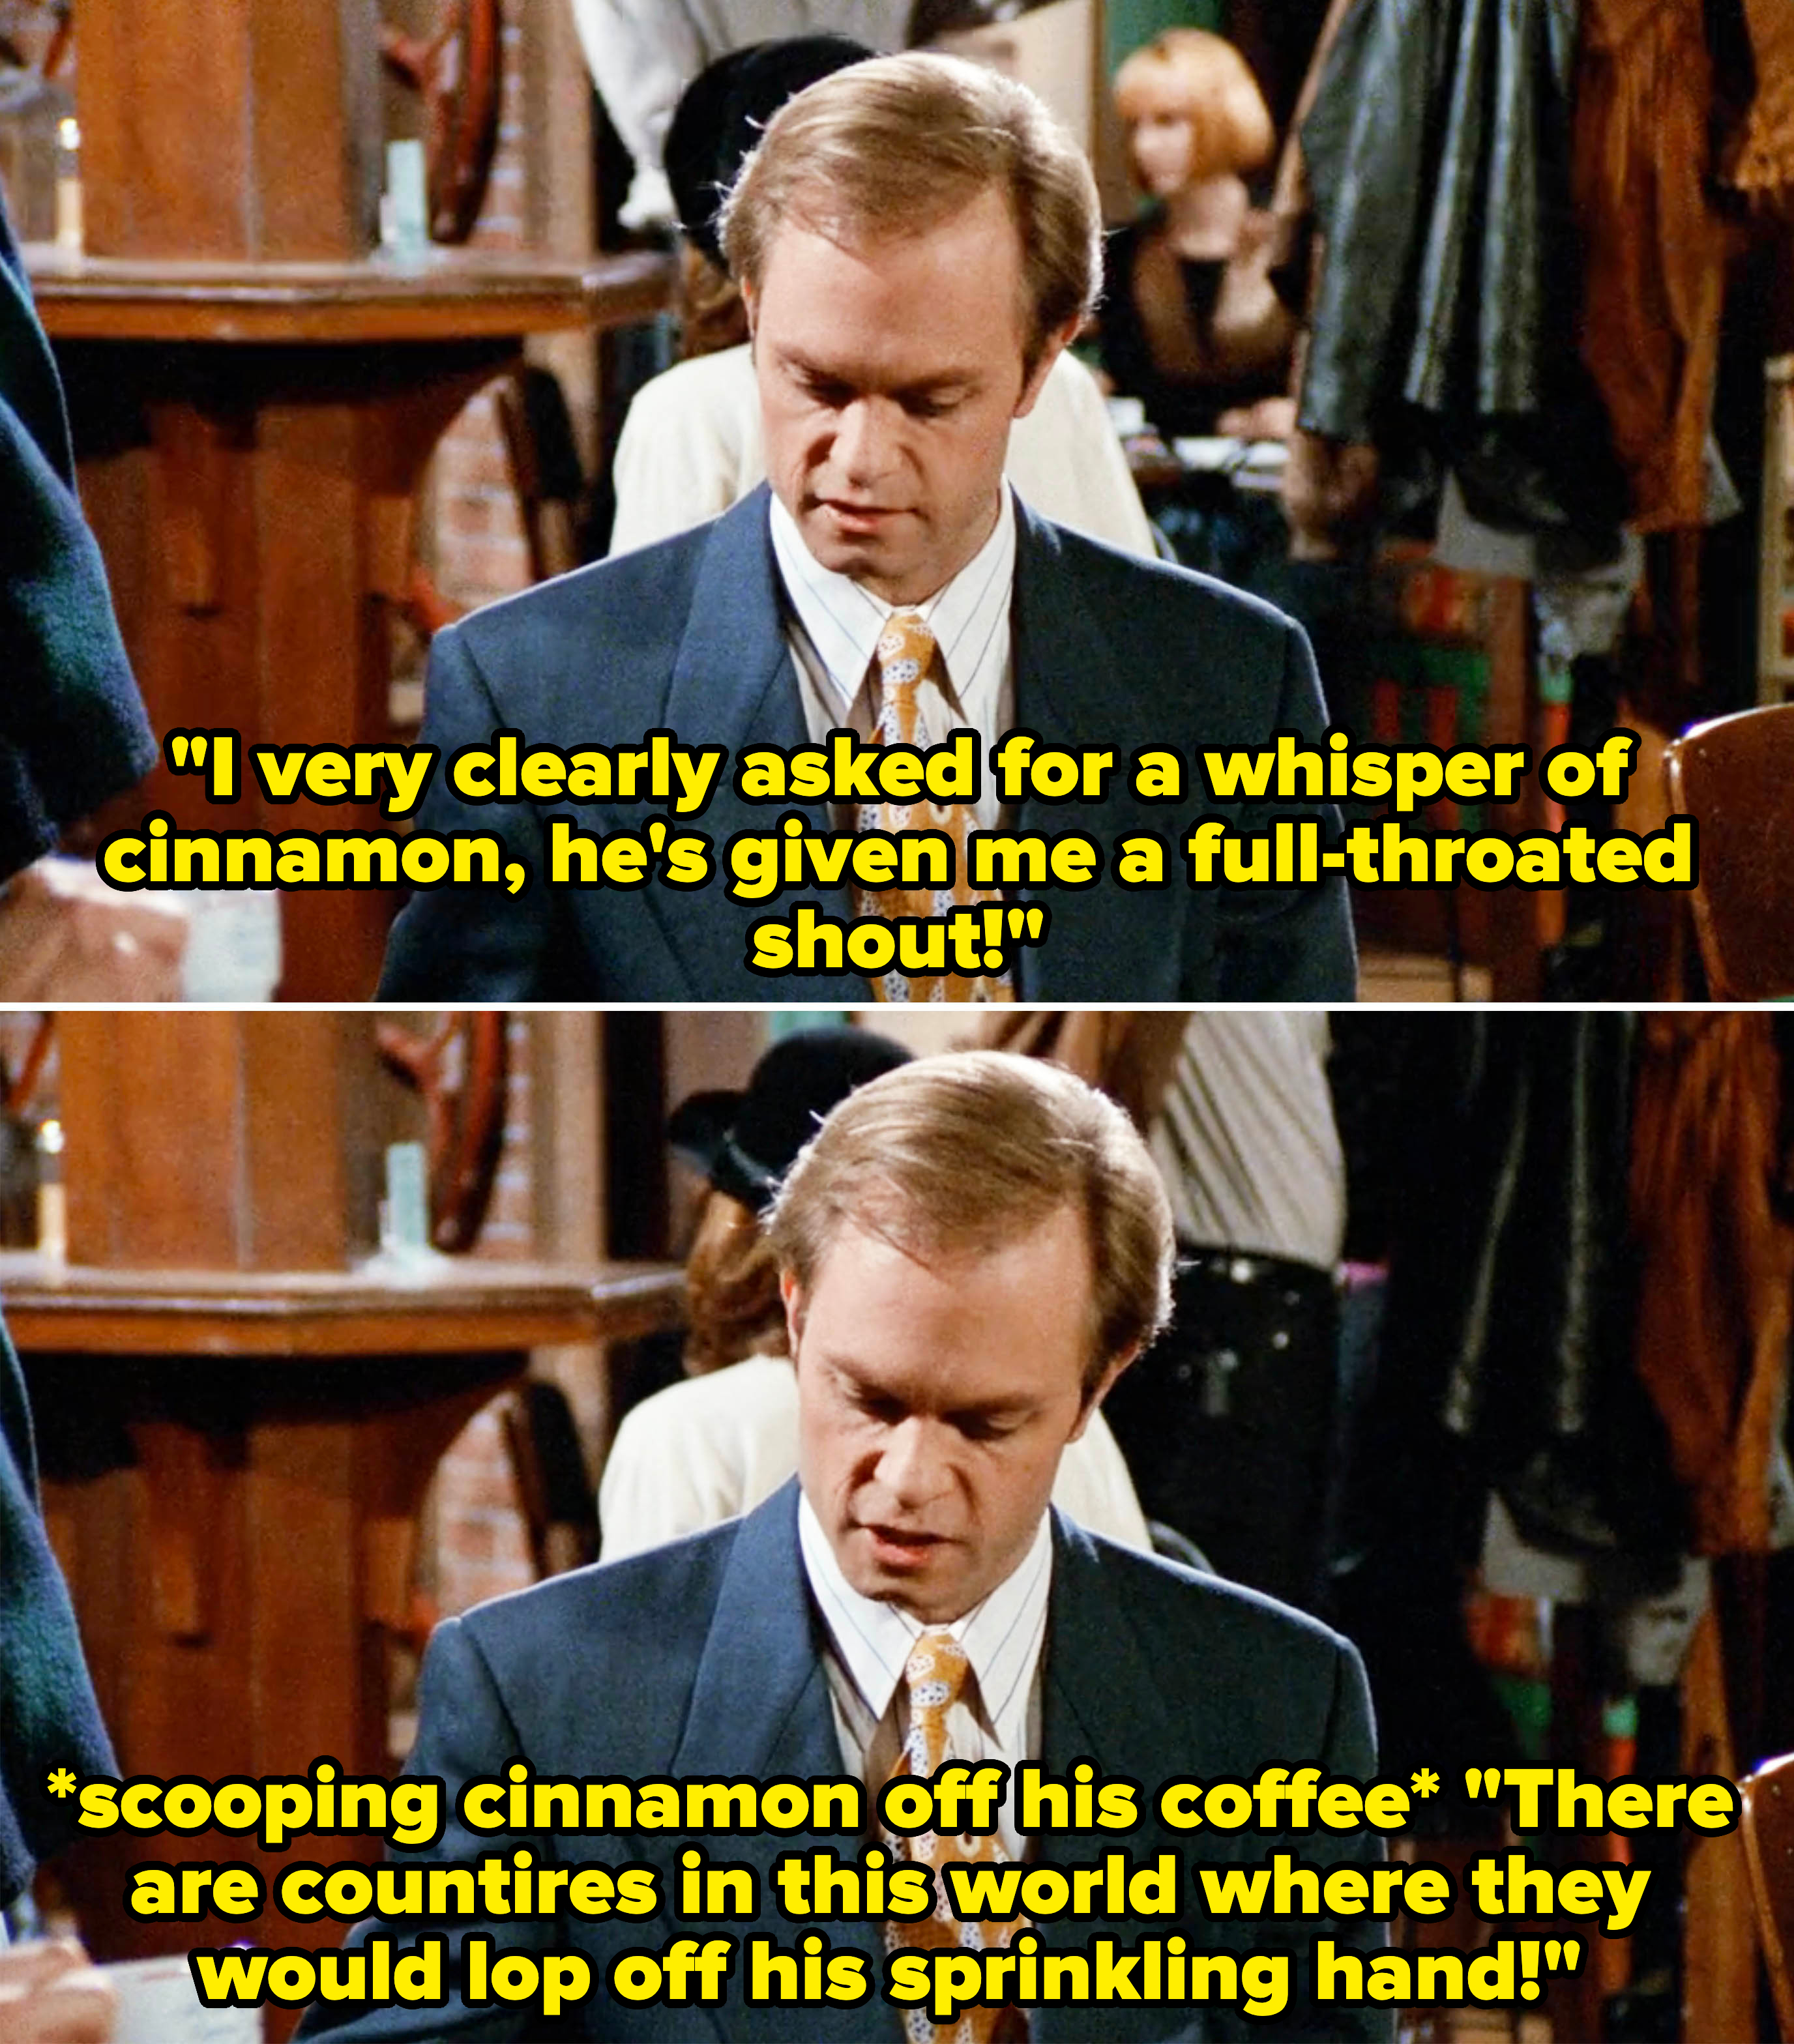 Niles complaining about the amount of cinnamon on his coffee